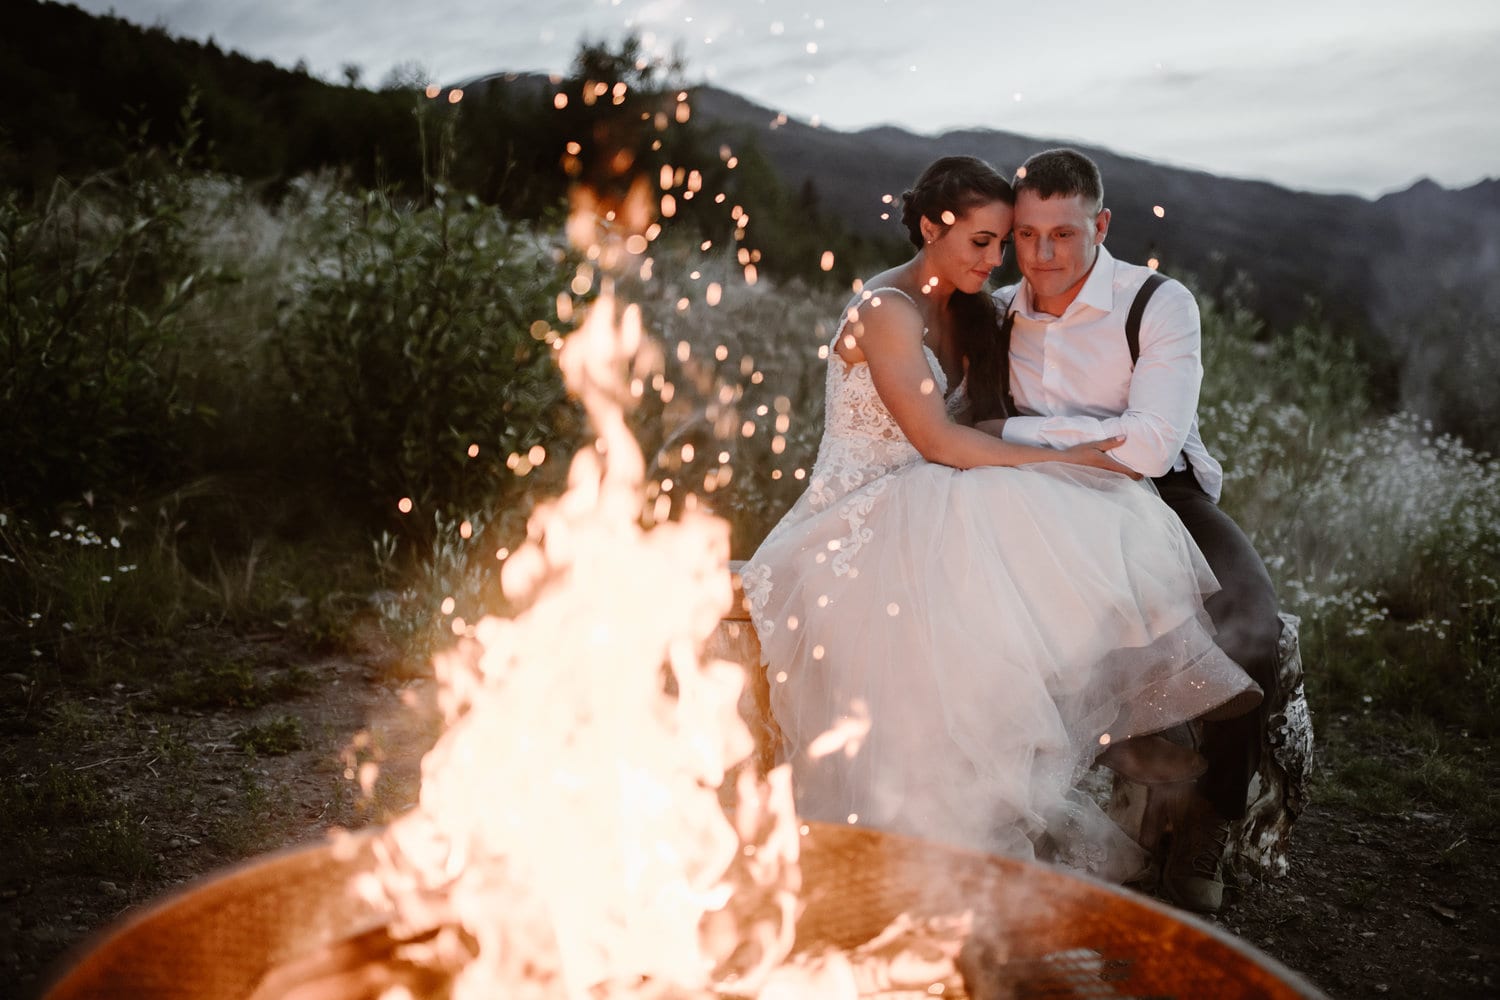 Bride and groom sit together during blue hours in Alaska, embracing, in front of a bonfire.